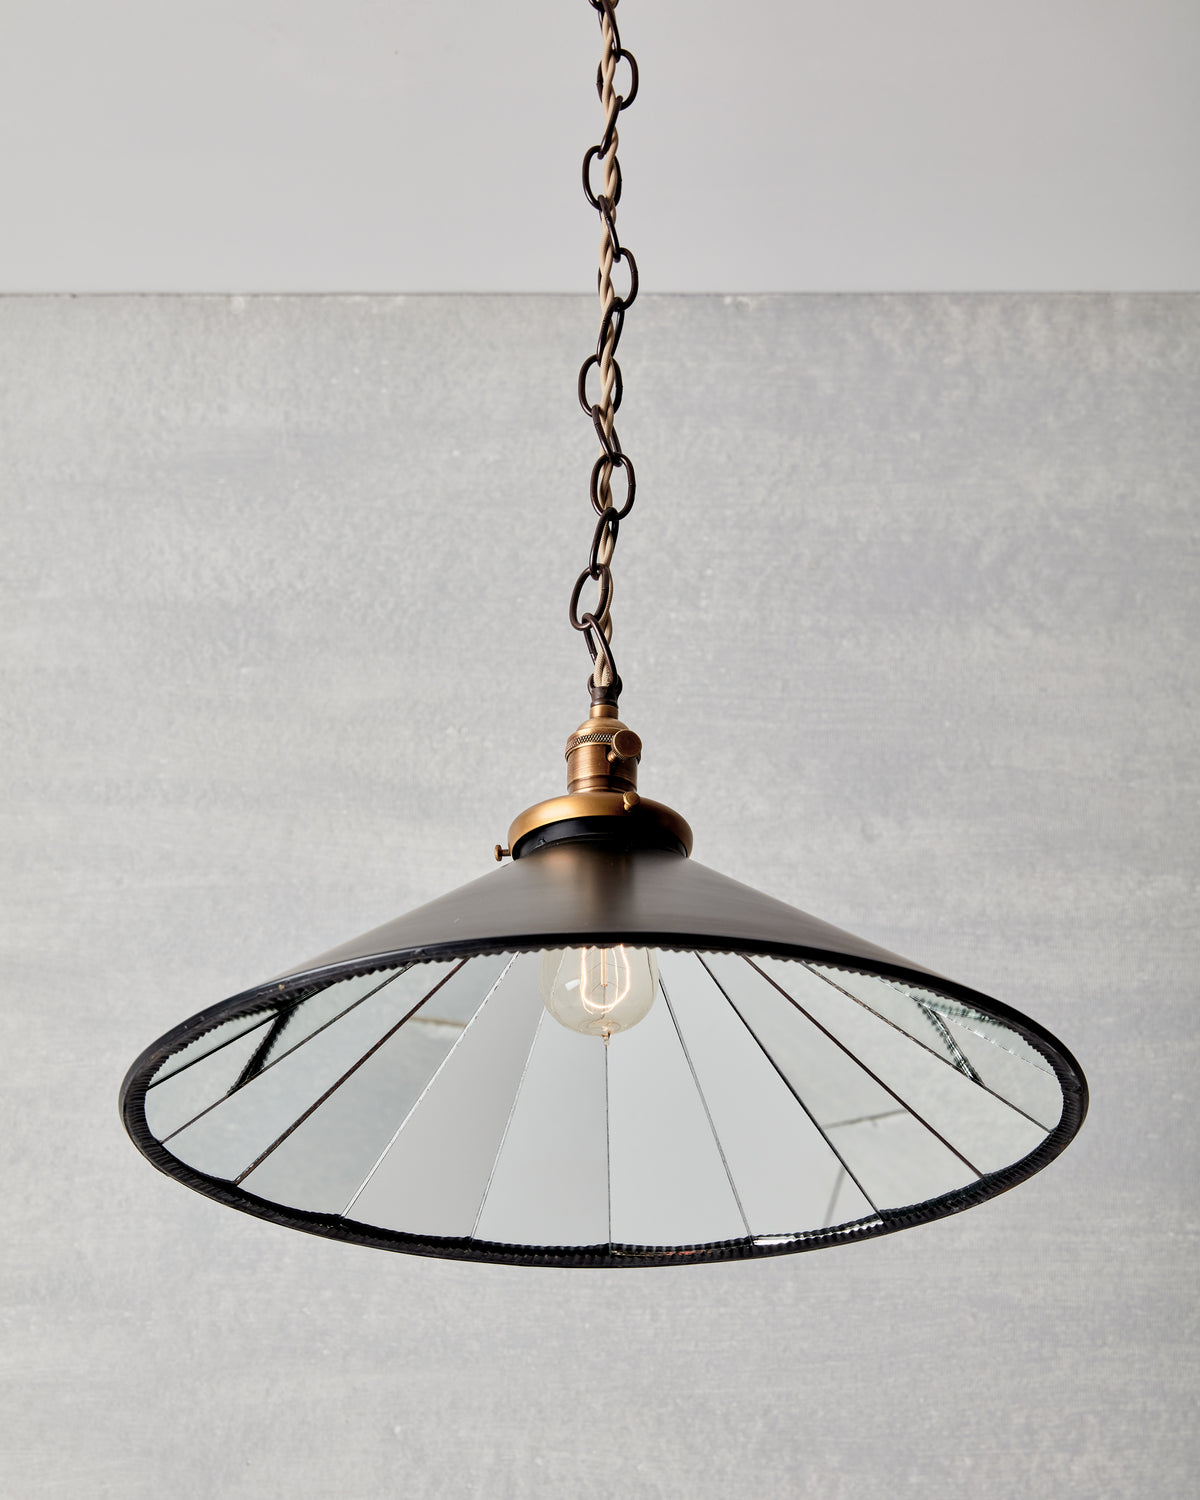 Classic large modern mirrored cone pendant with oil rubbed brass chain.  Hardwired light fixture. Simple interior design, made in the USA.